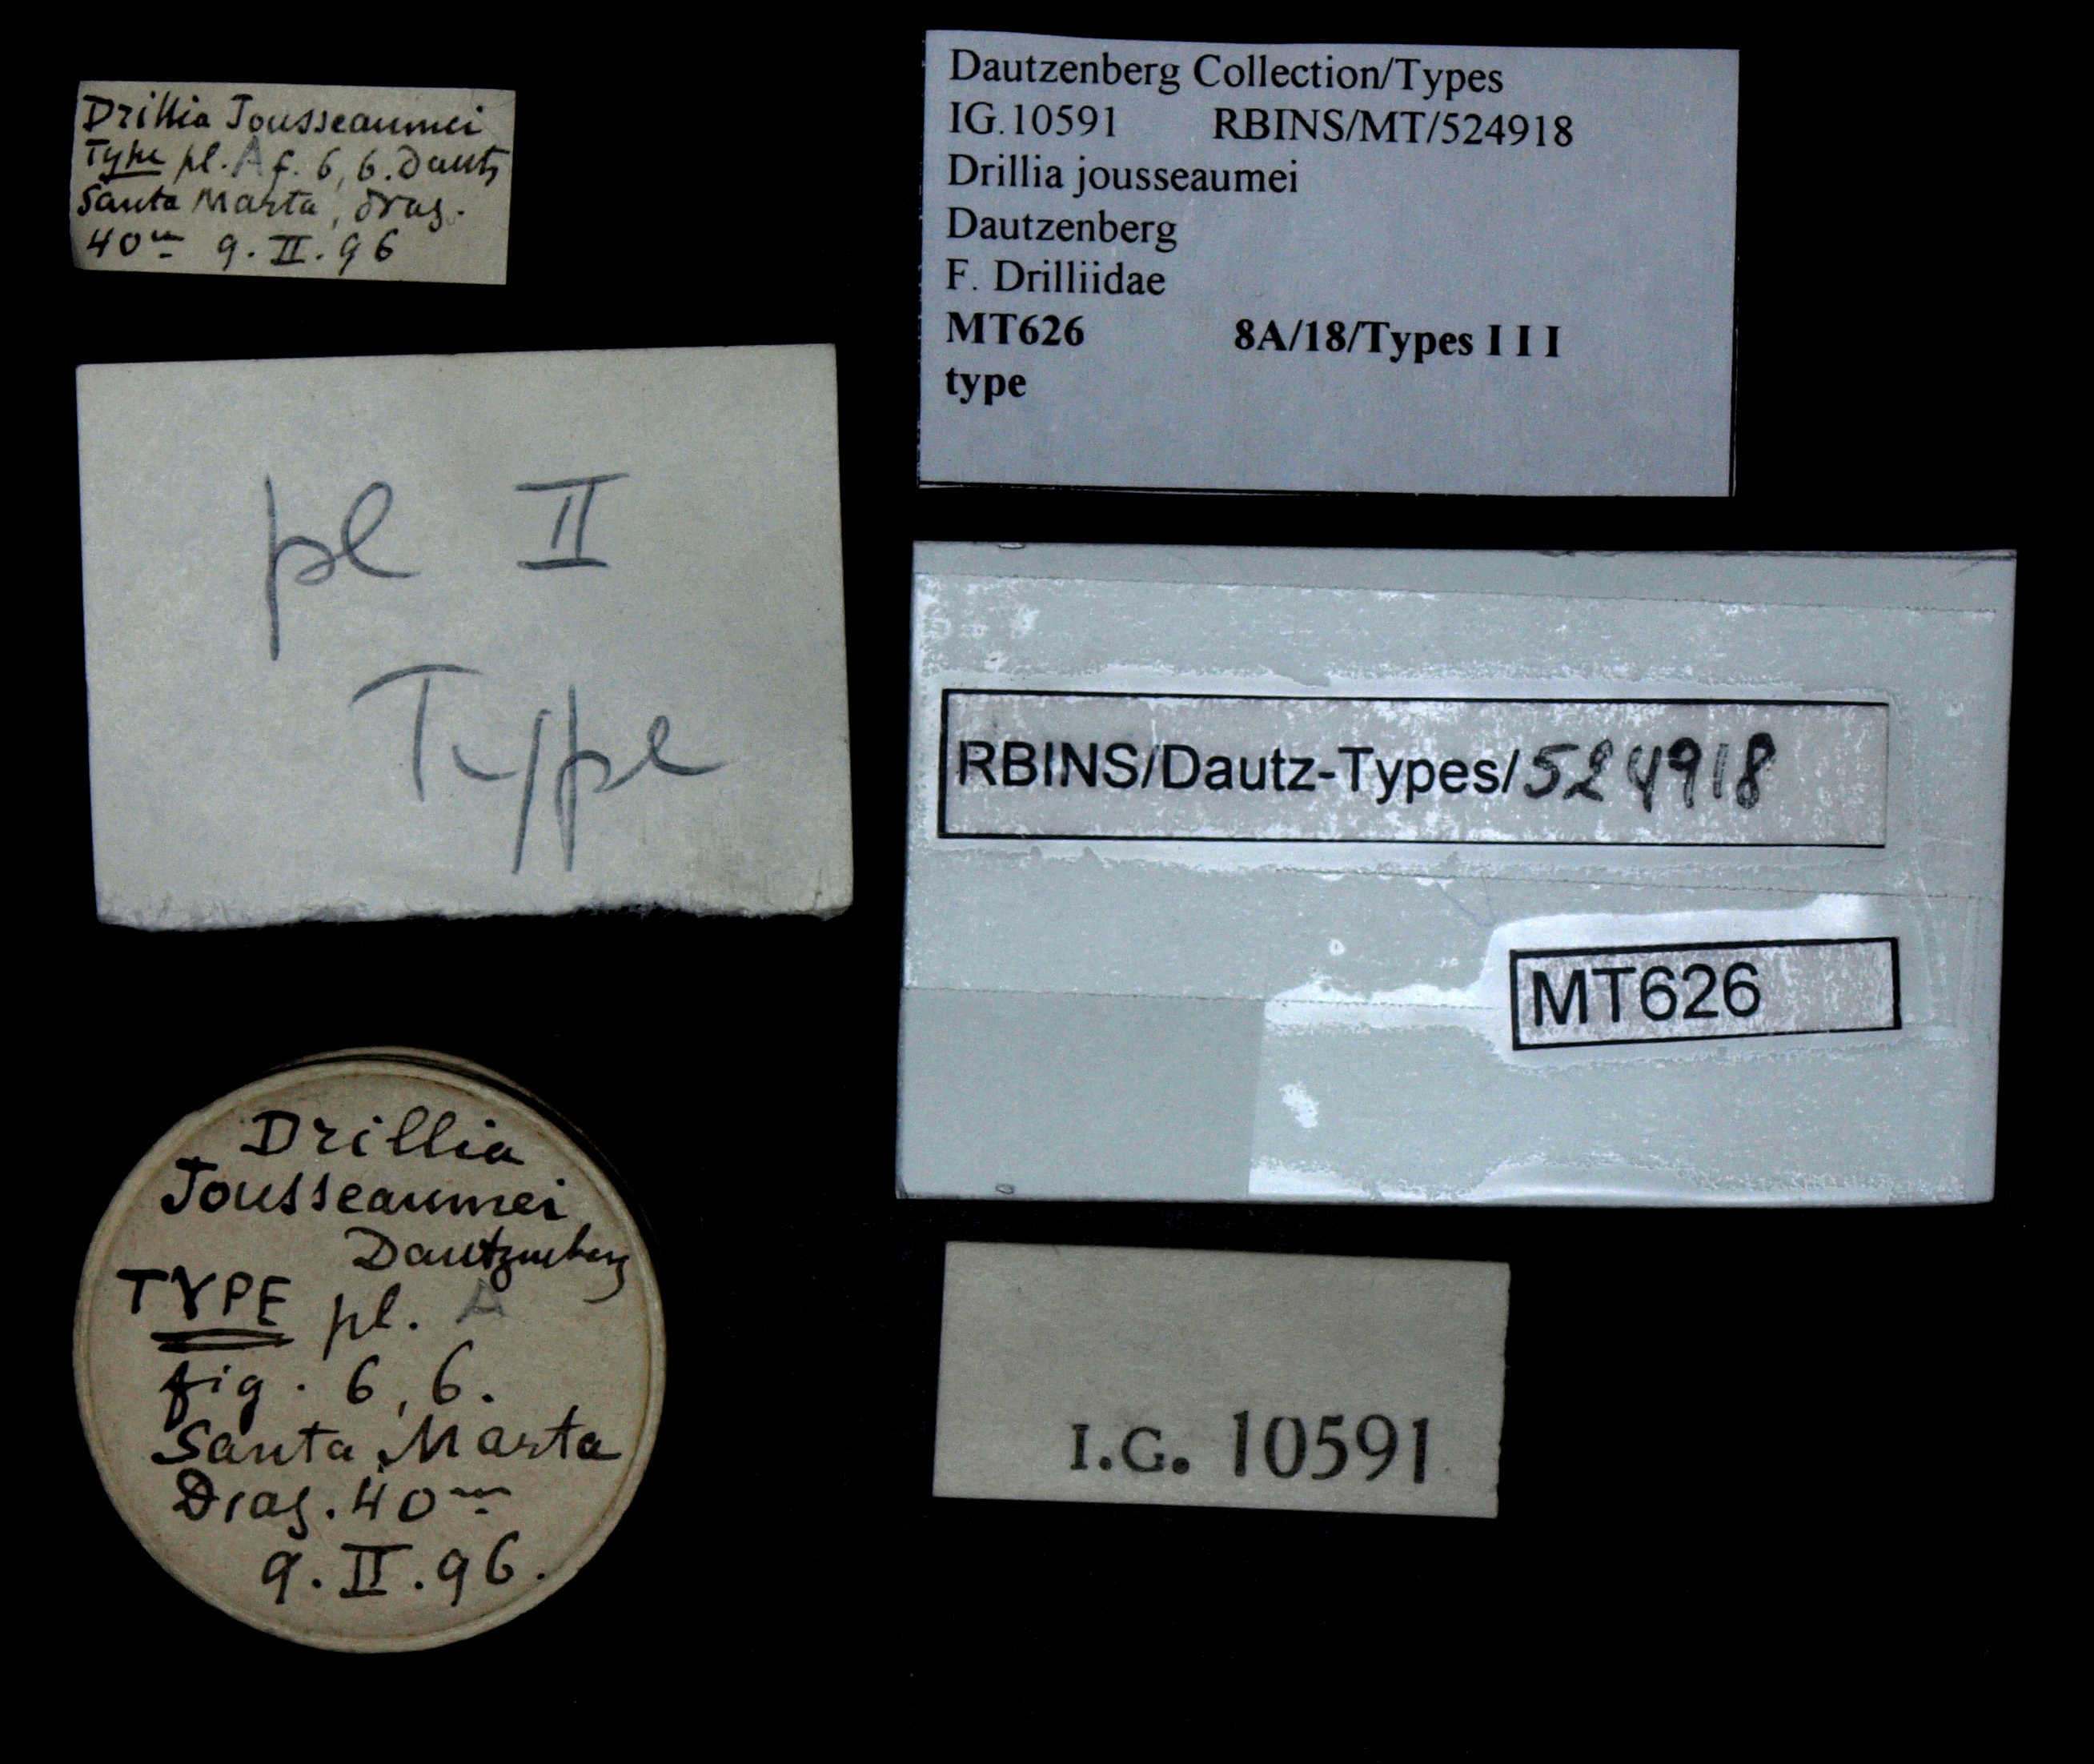 BE-RBINS-INV TYPE MT 626 Drillia jousseaumei LABELS.jpg